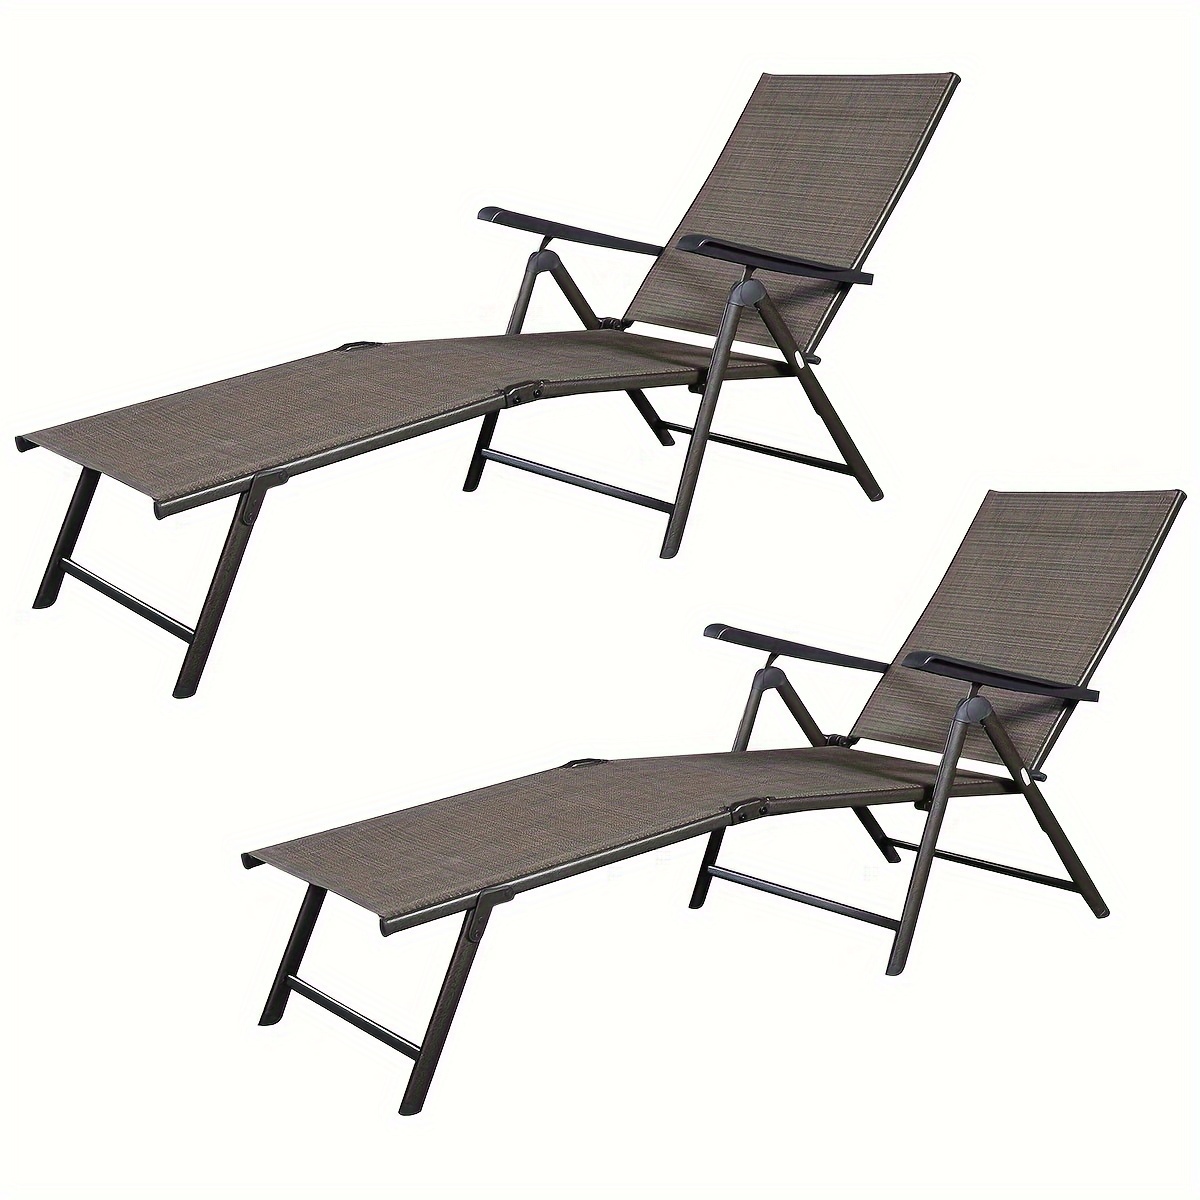 

Costway 2pcs Pool Chaise Lounge Chair Recliner, Outdoor Patio Furniture Adjustable